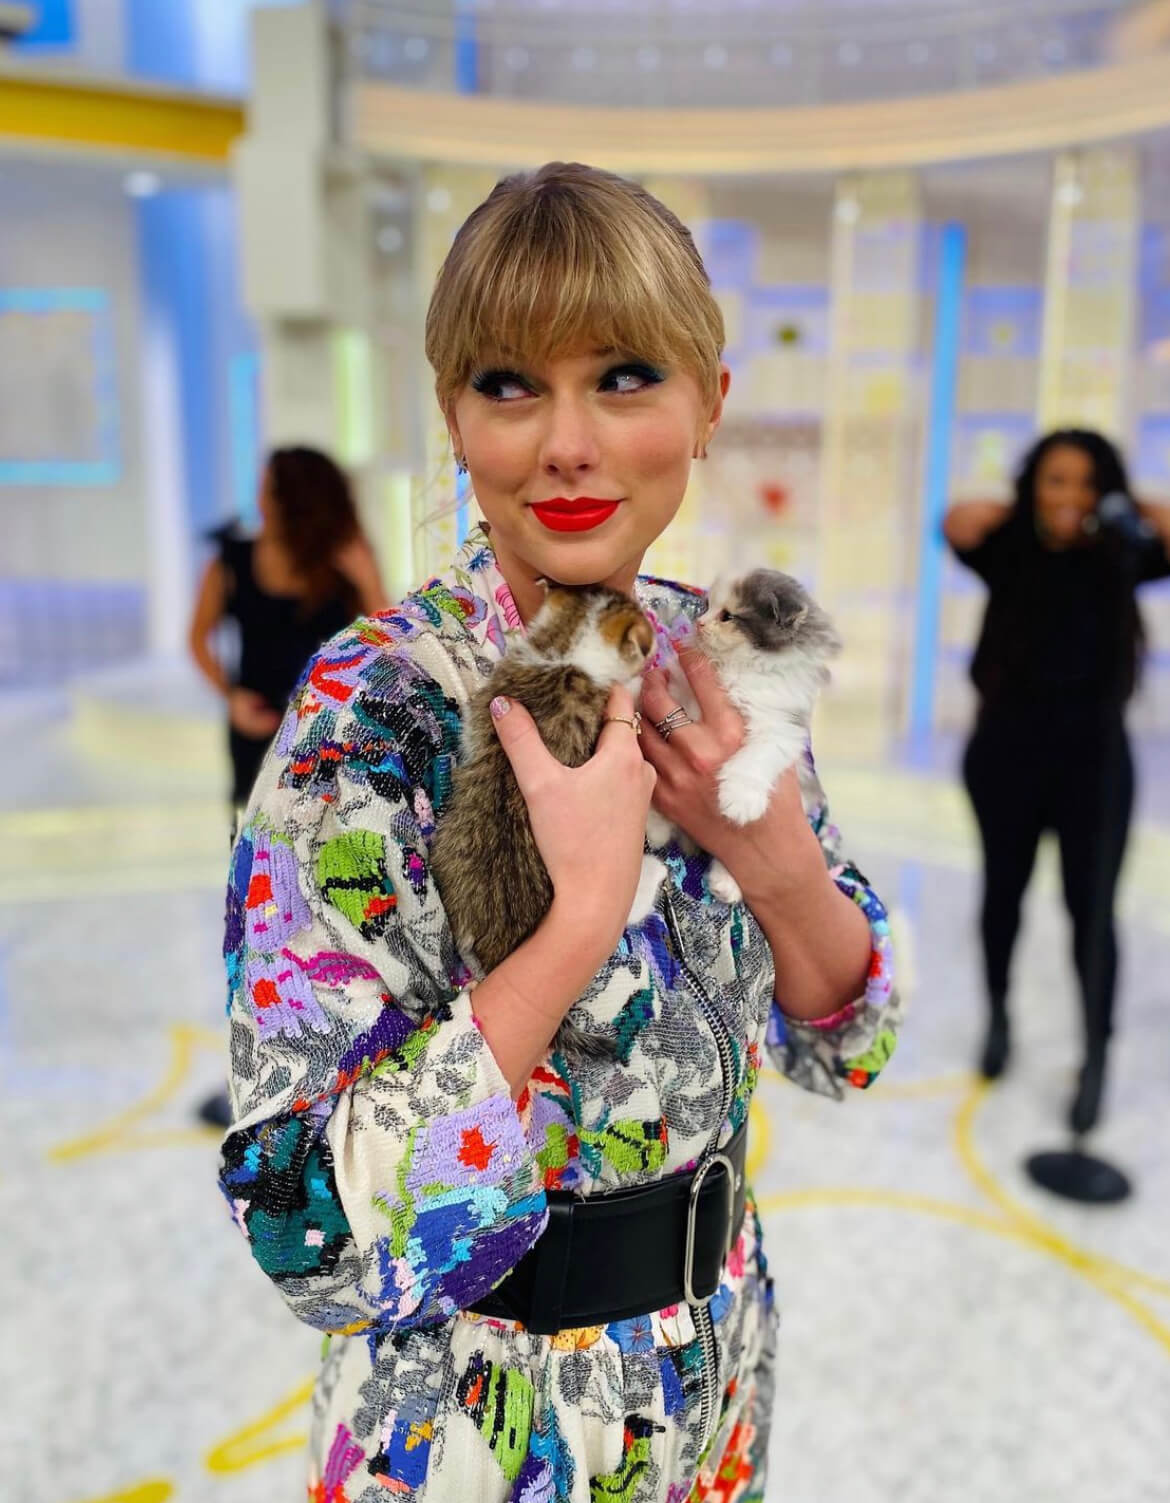 Taylor Swift's cats